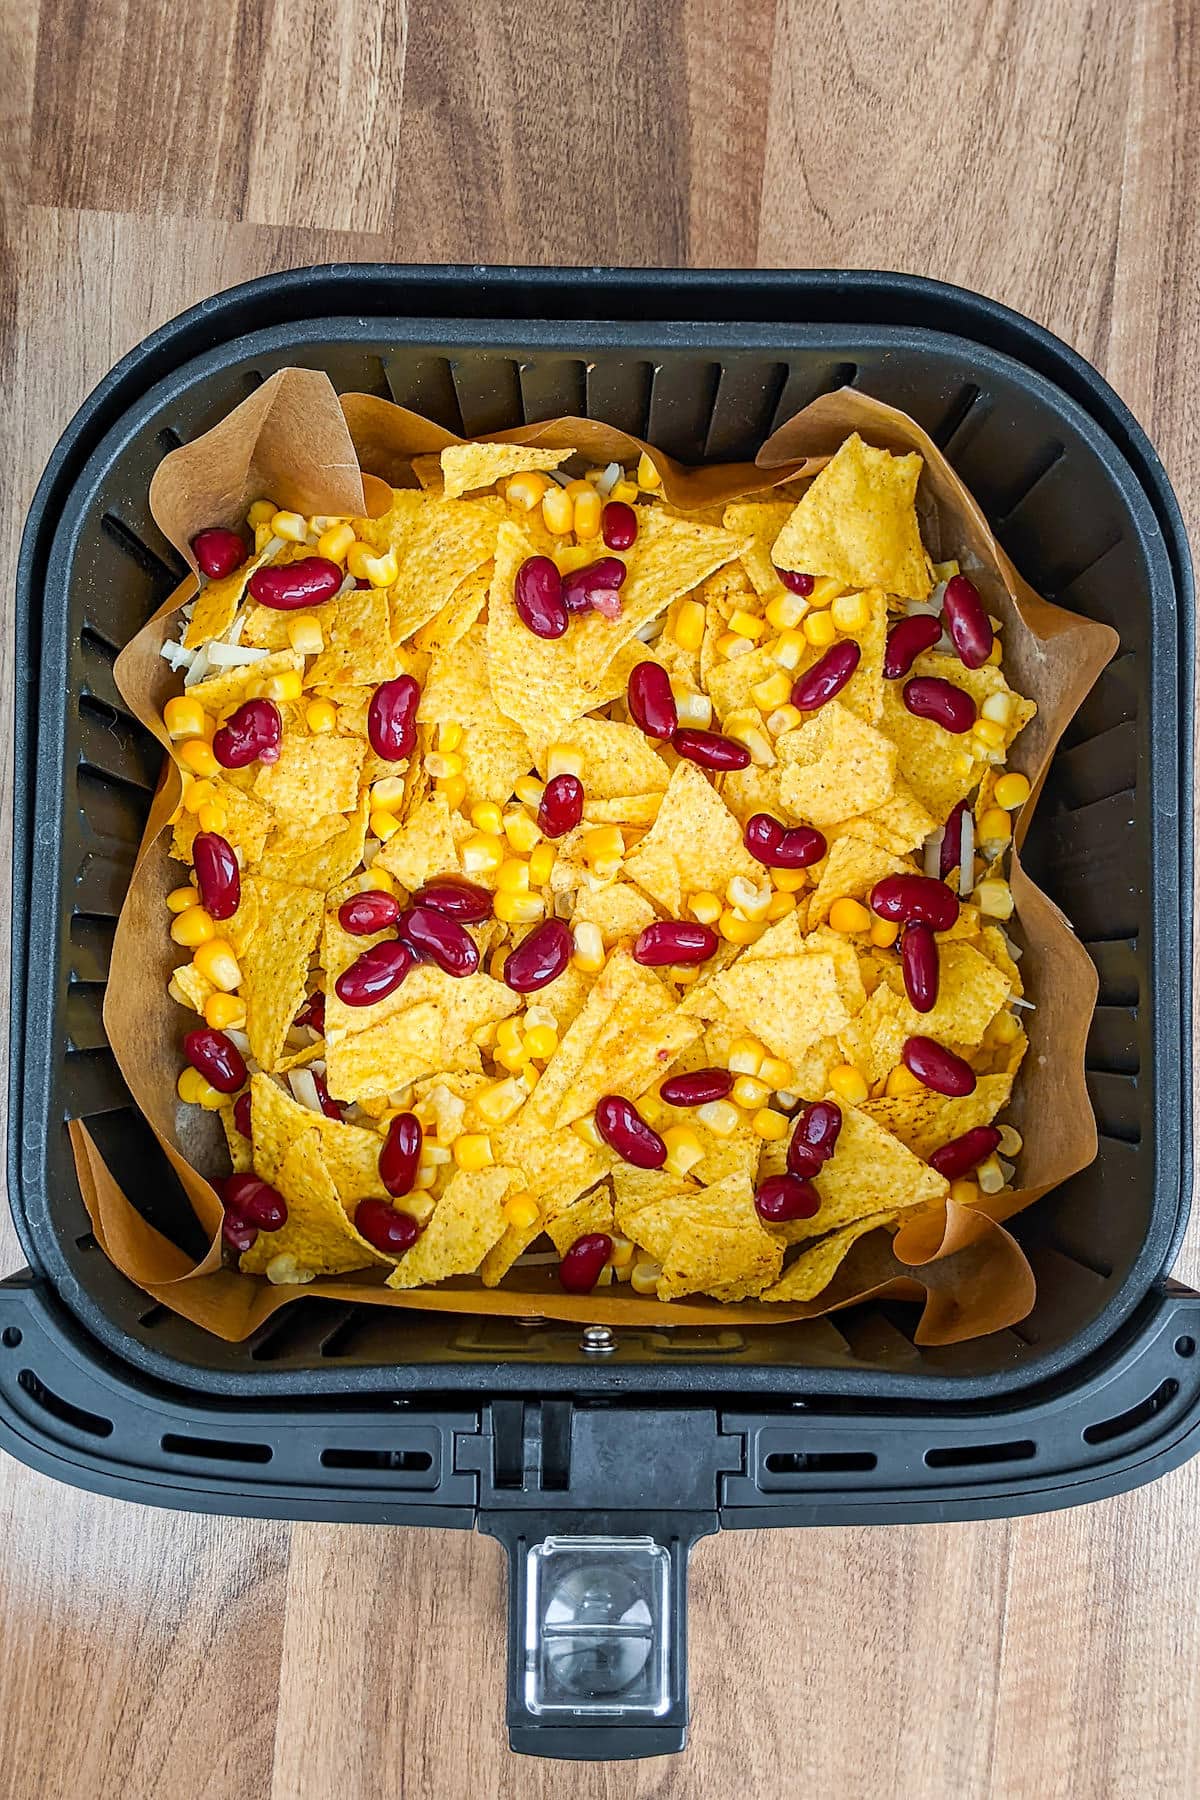 Air fryer basket with tortilla chips with canned corn and black beans.